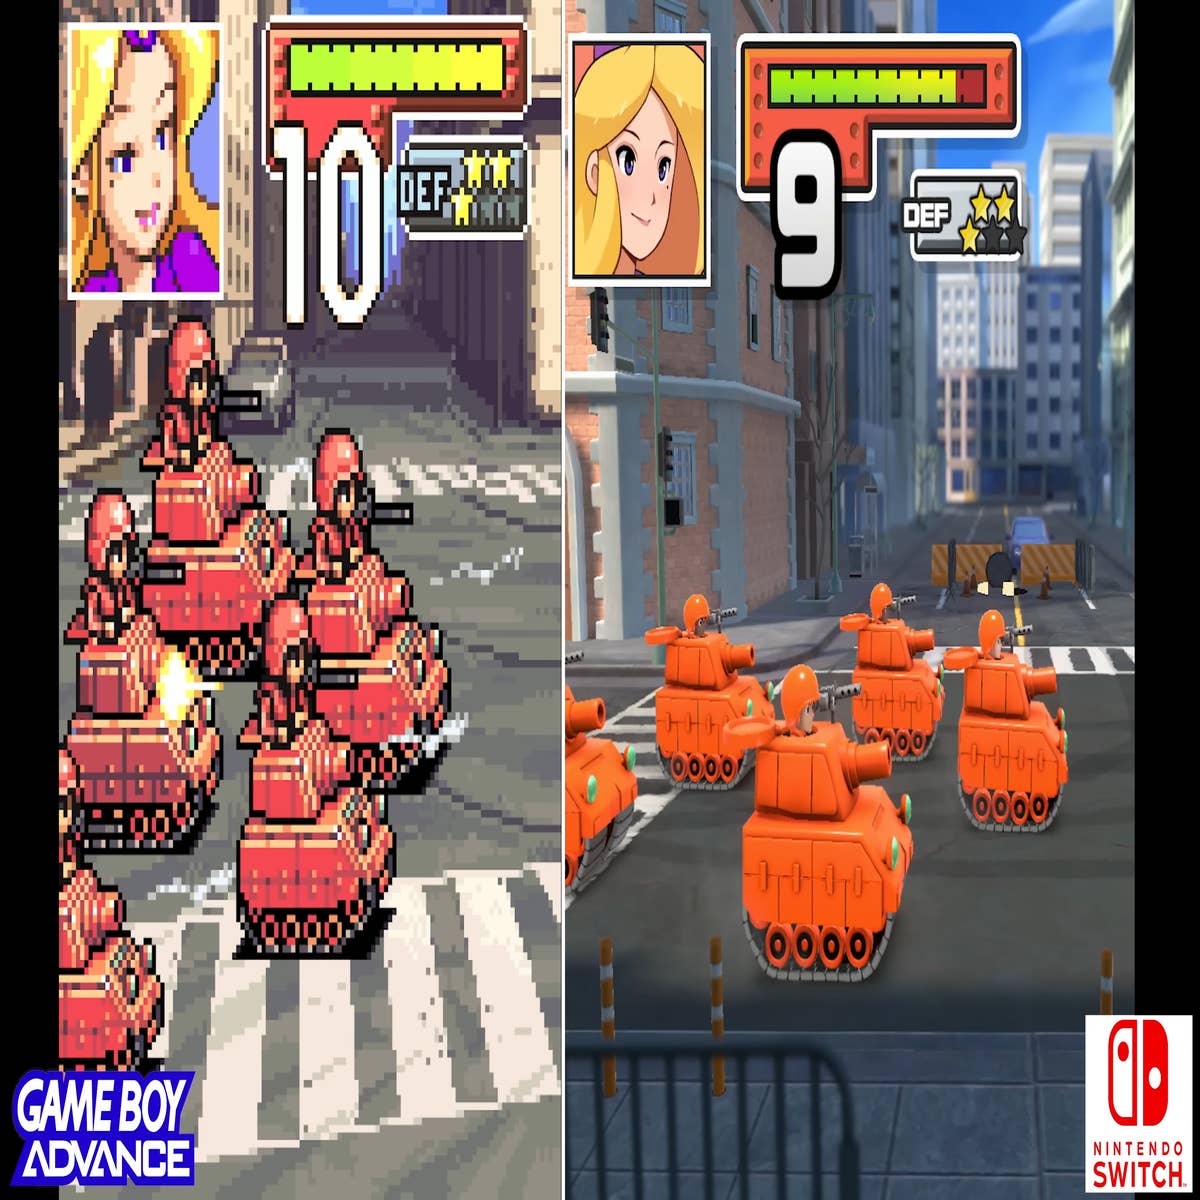 Nintendo is remastering the first two Advance Wars games for the